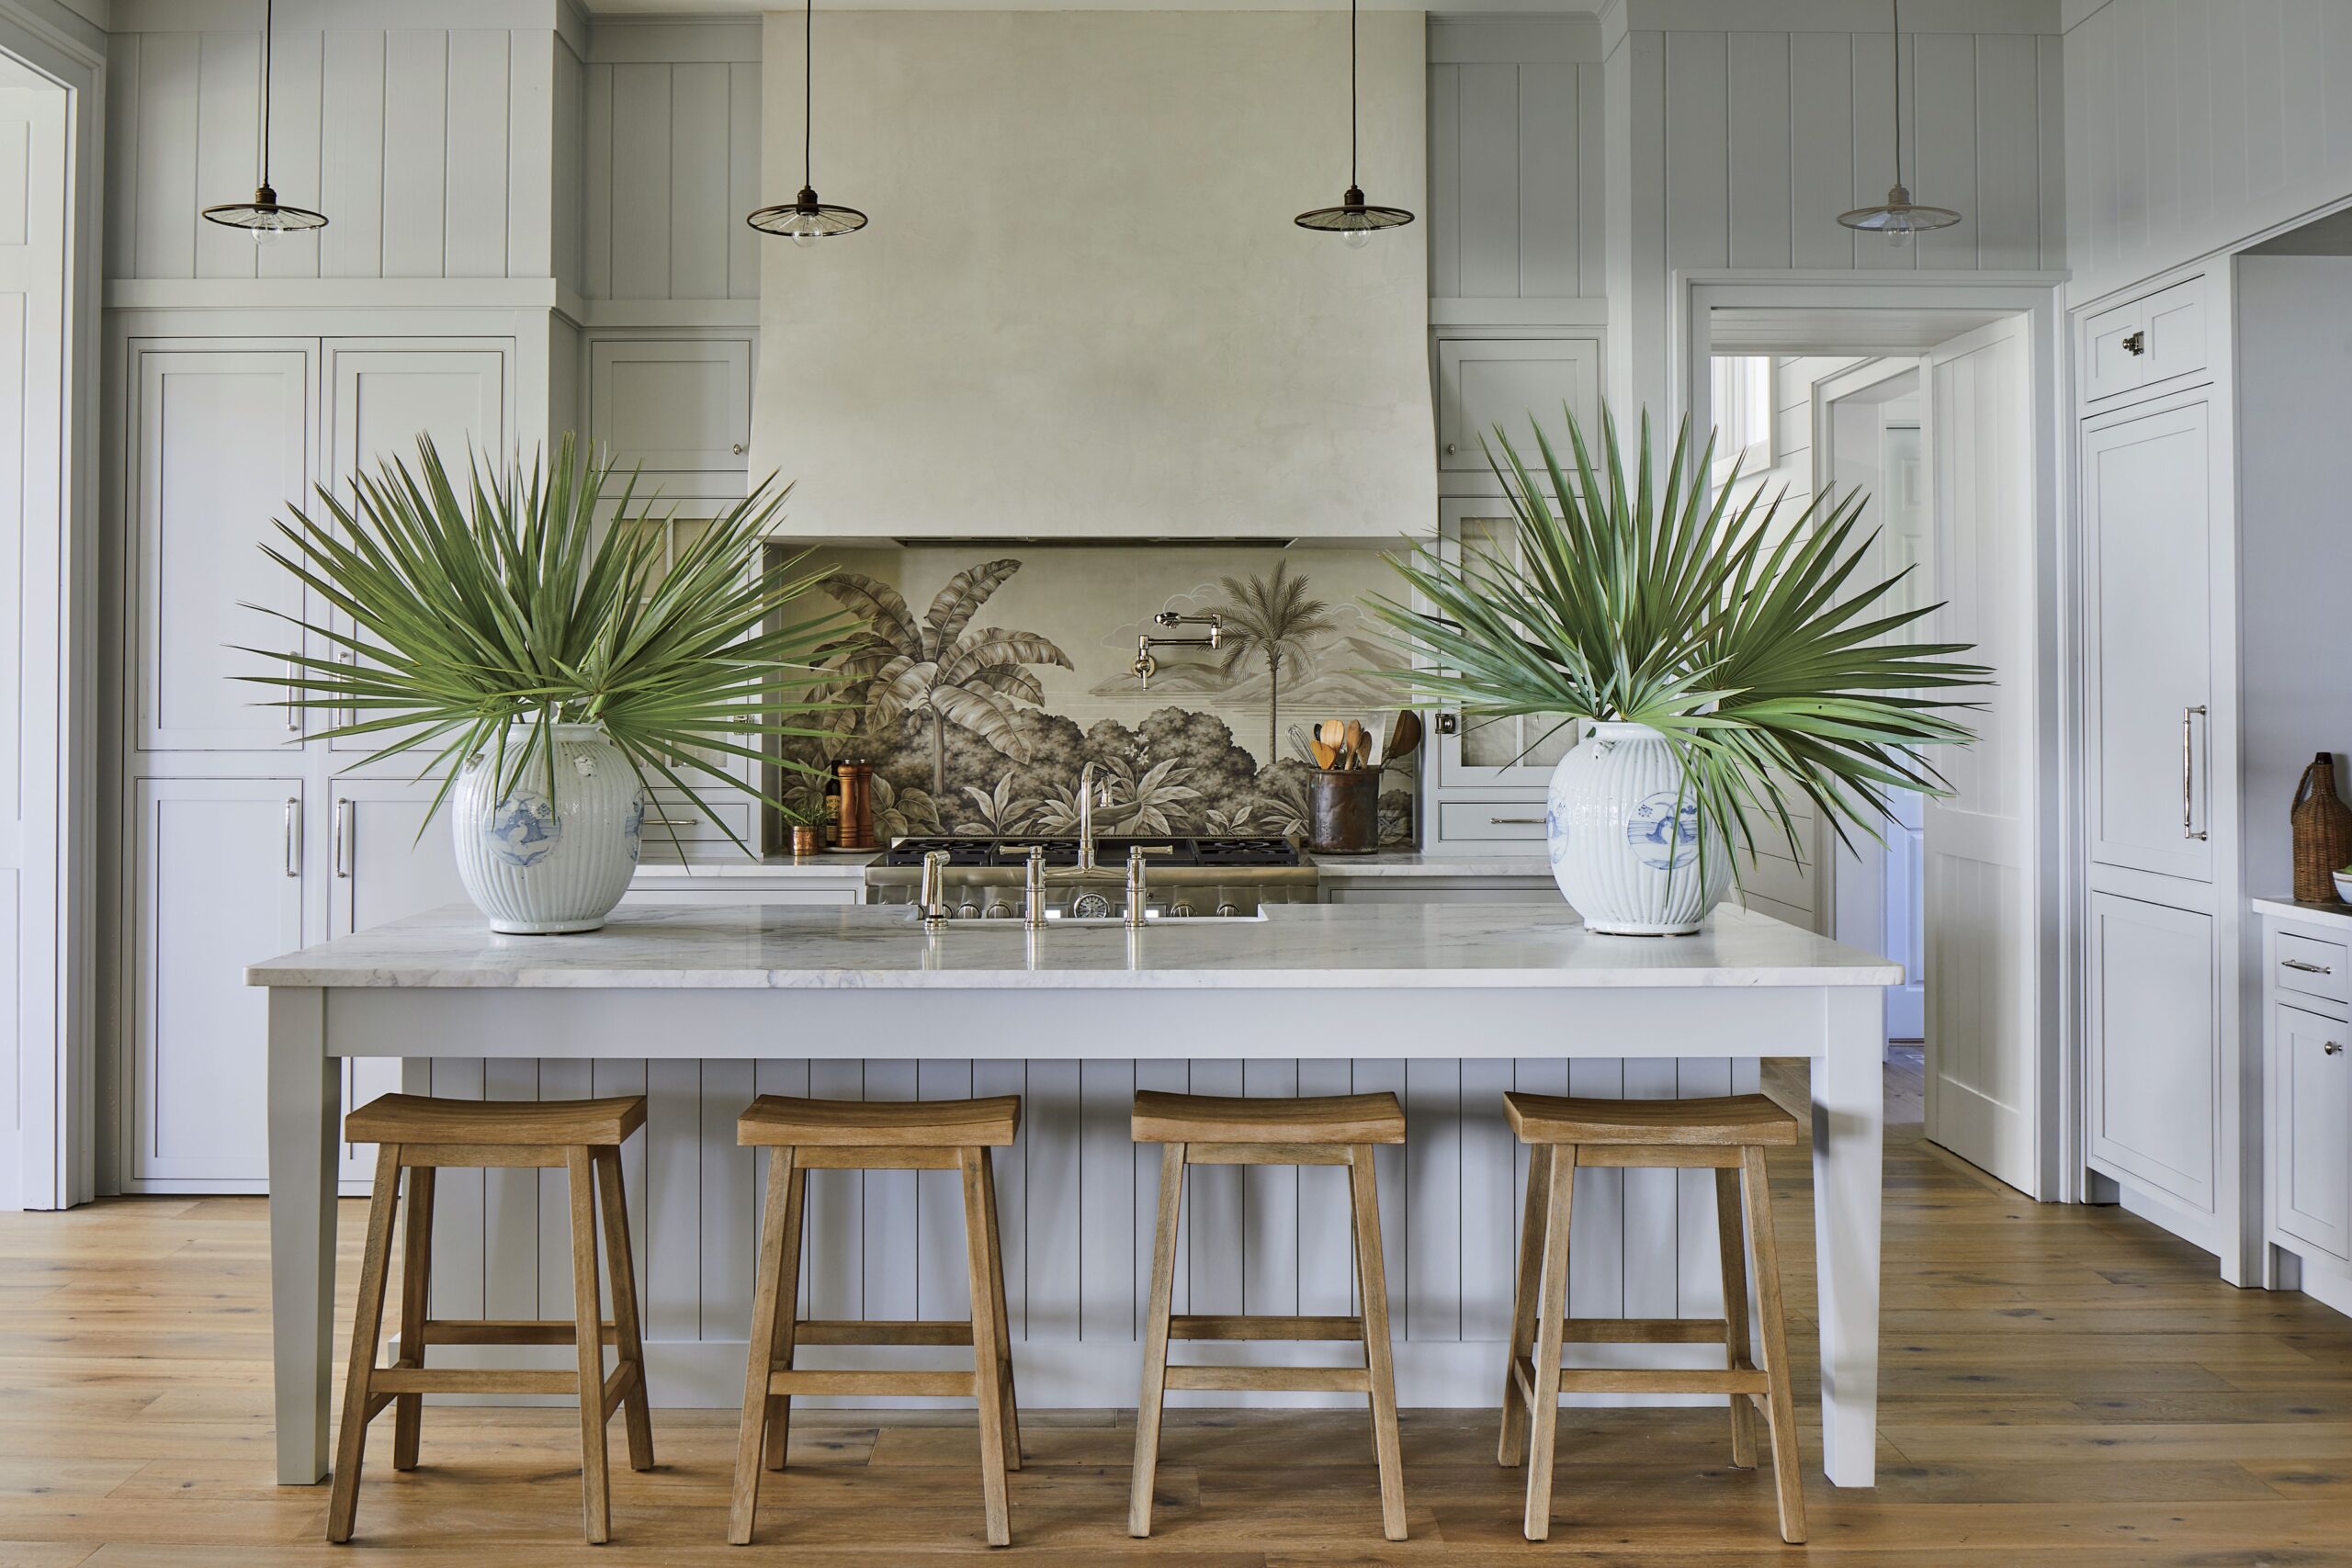 beach style kitchen island featuring palm leaves inside vases